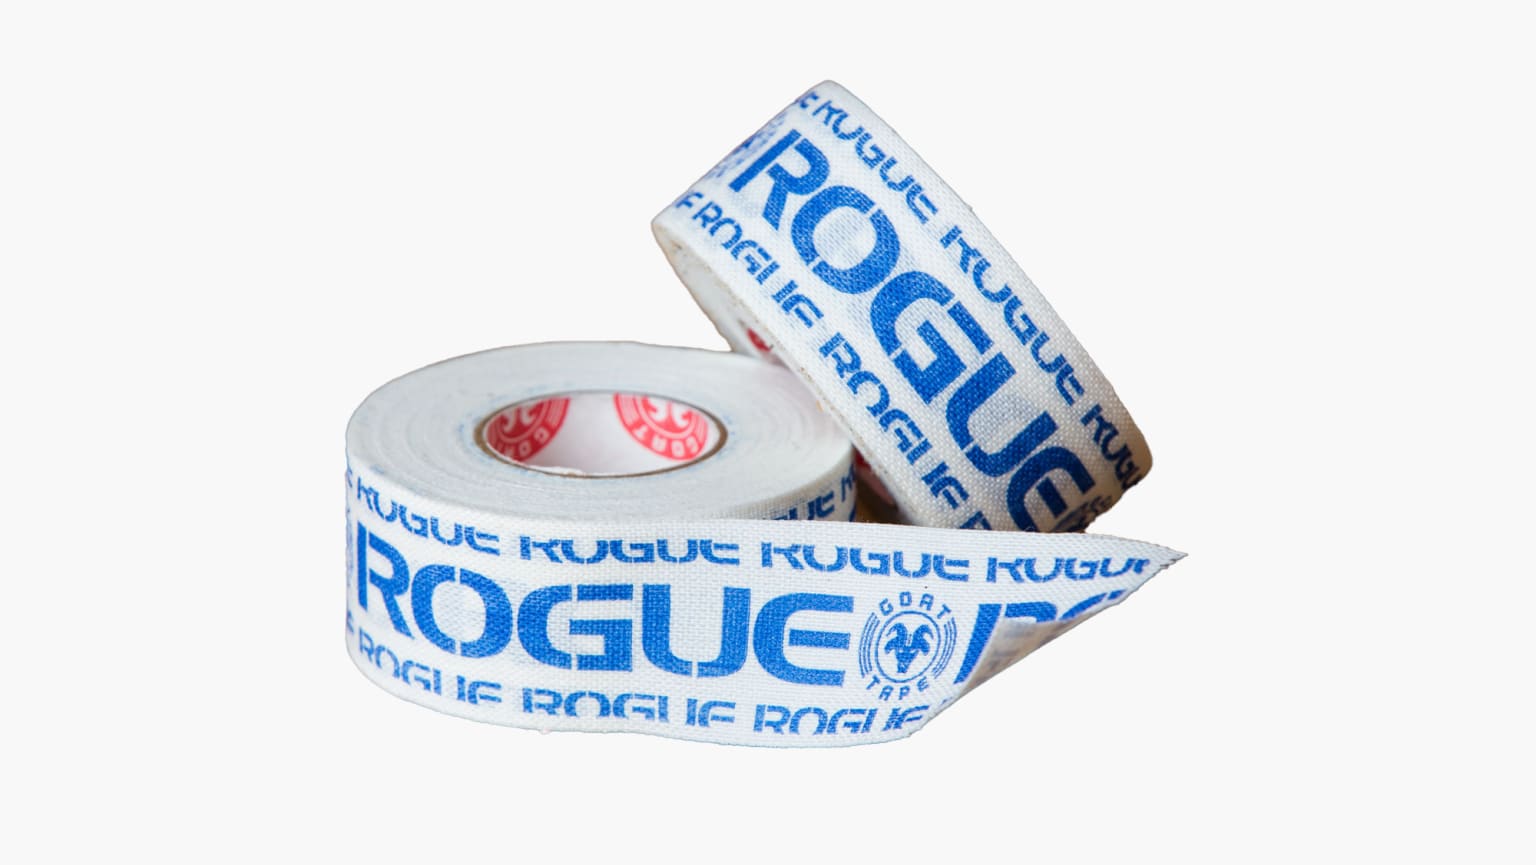 Rogue Scary Sticky Thin Goat Tape - 4-Pack